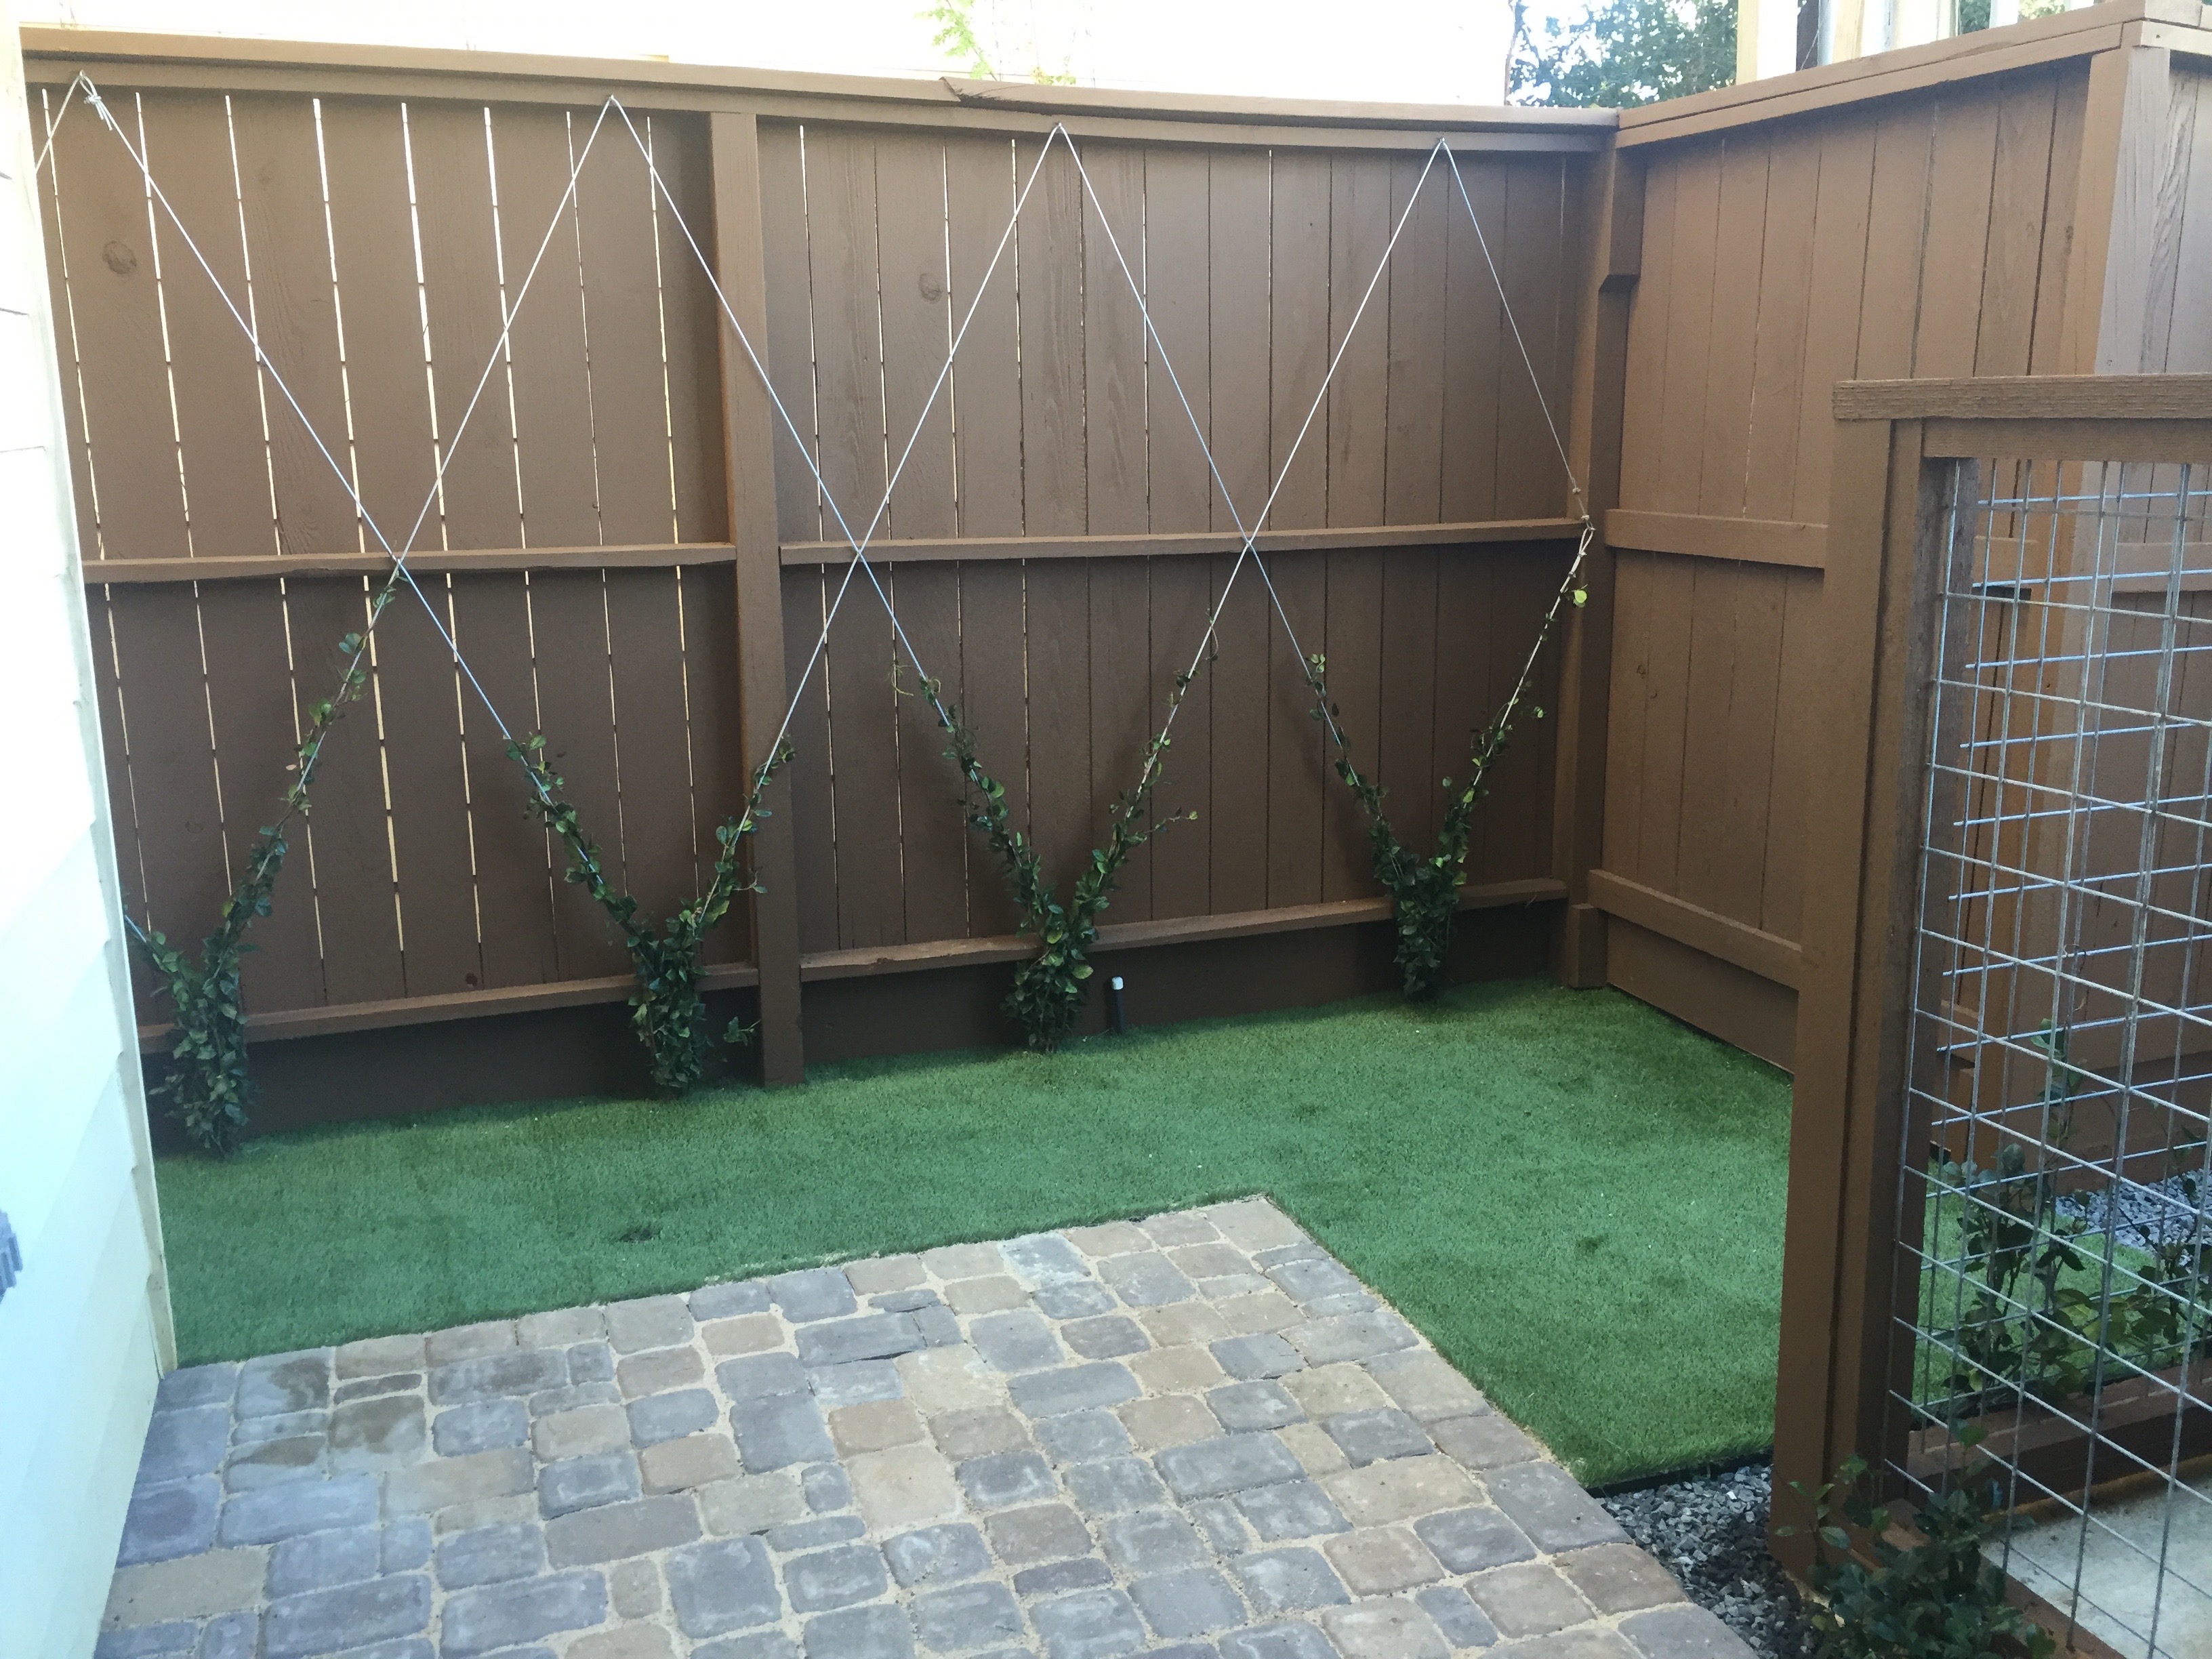 Artificial Sod with Trellis along the fence